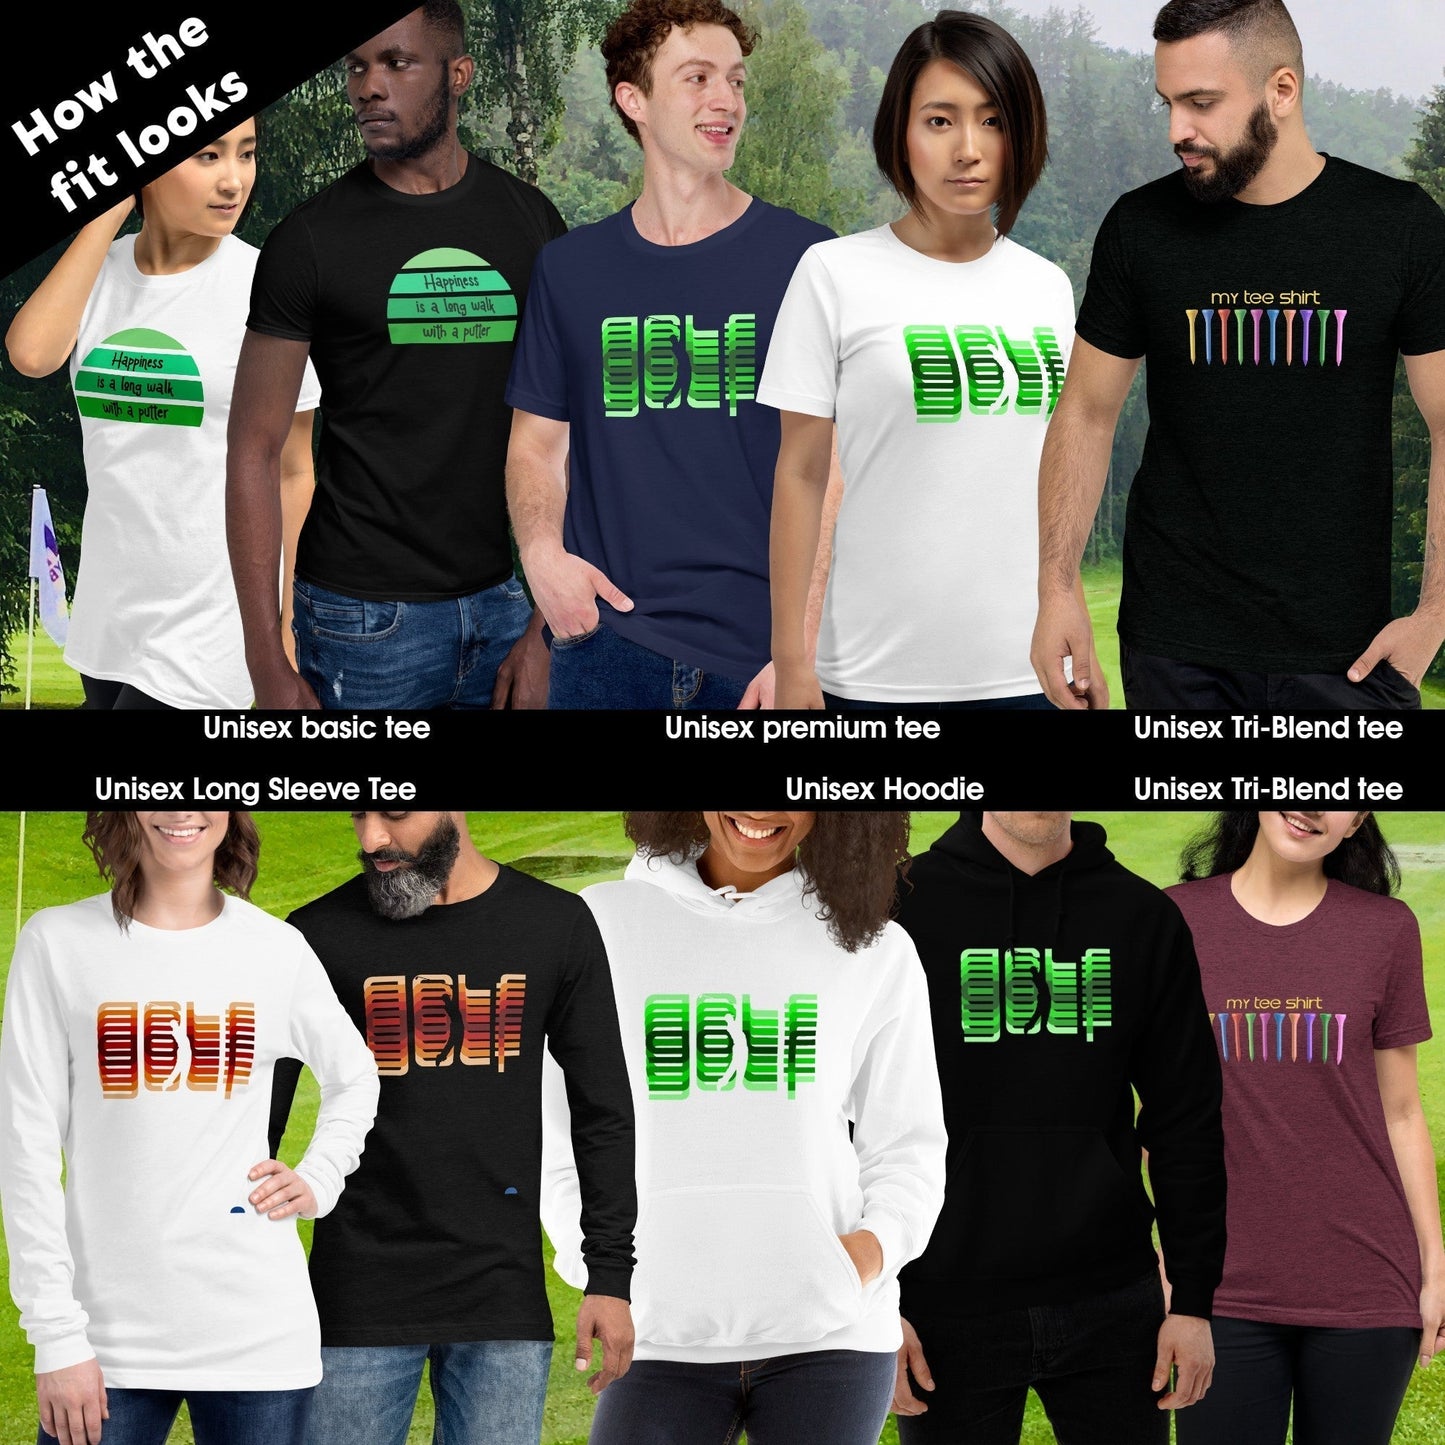 Live Life to the Fullest Golf TShirt and Hoodie is a Creative Golf Graphic design for Men and Women